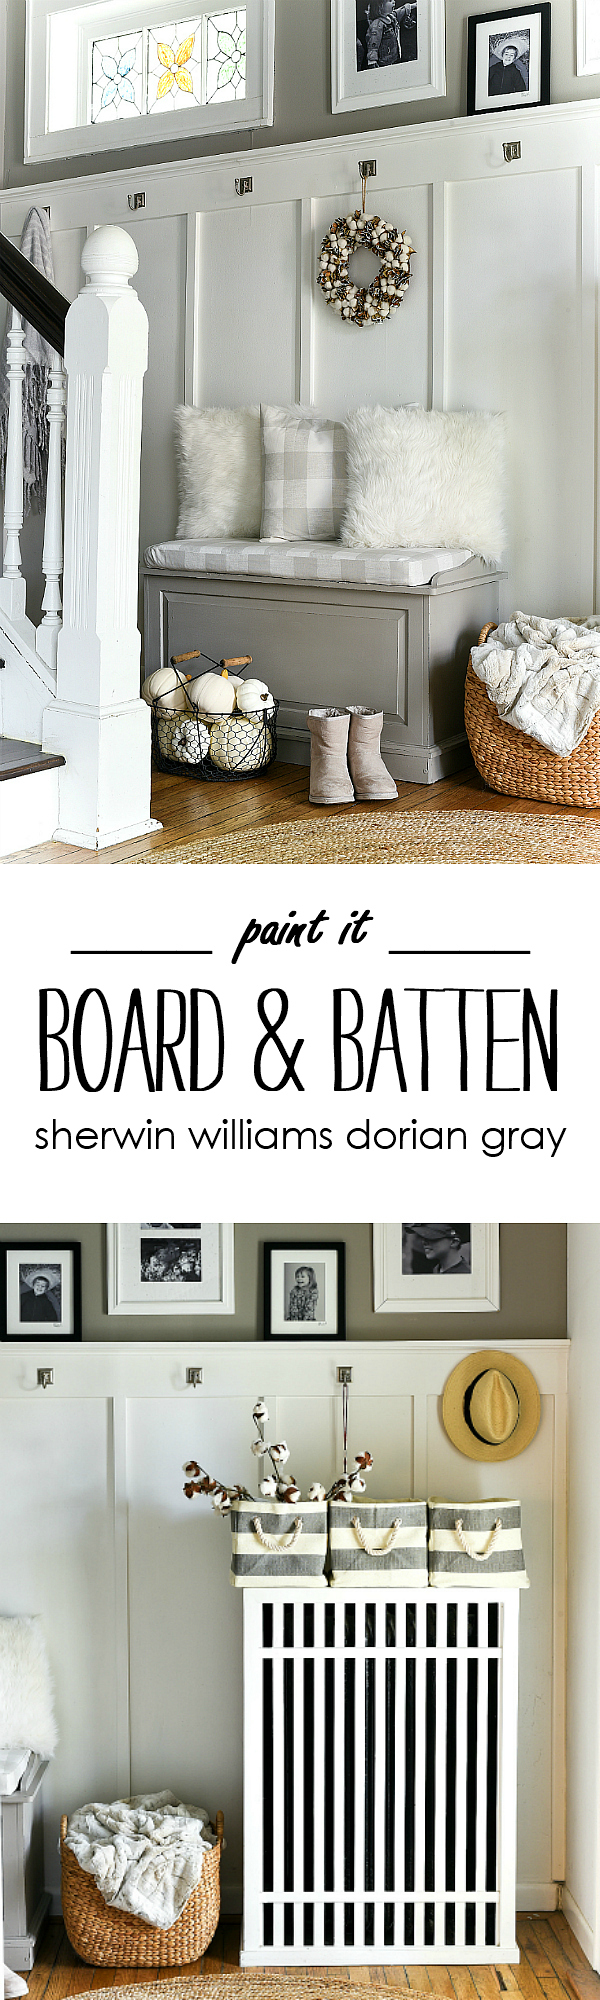 Board and Batten Entry with Sherwin Williams Dorian Gray